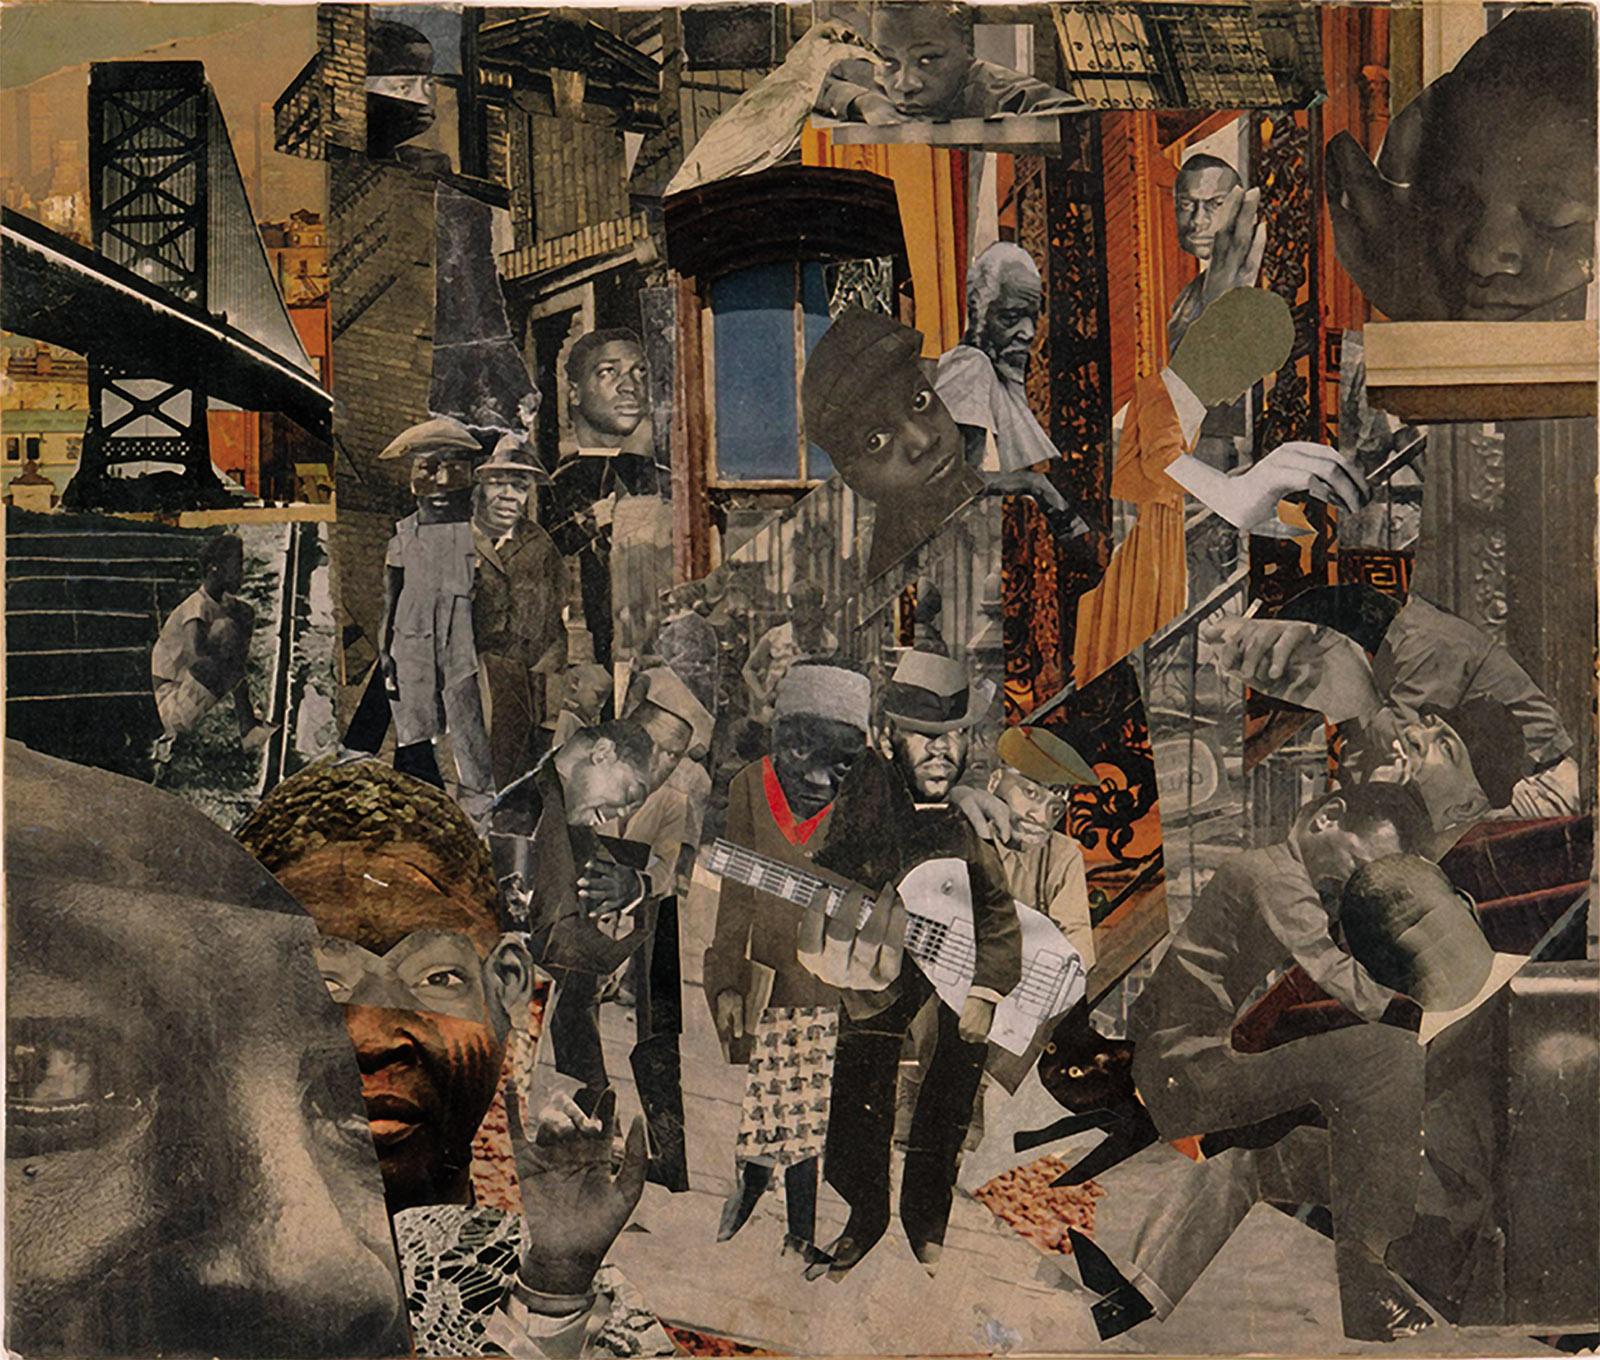 Collage by Romare Bearden, The Street (1964)